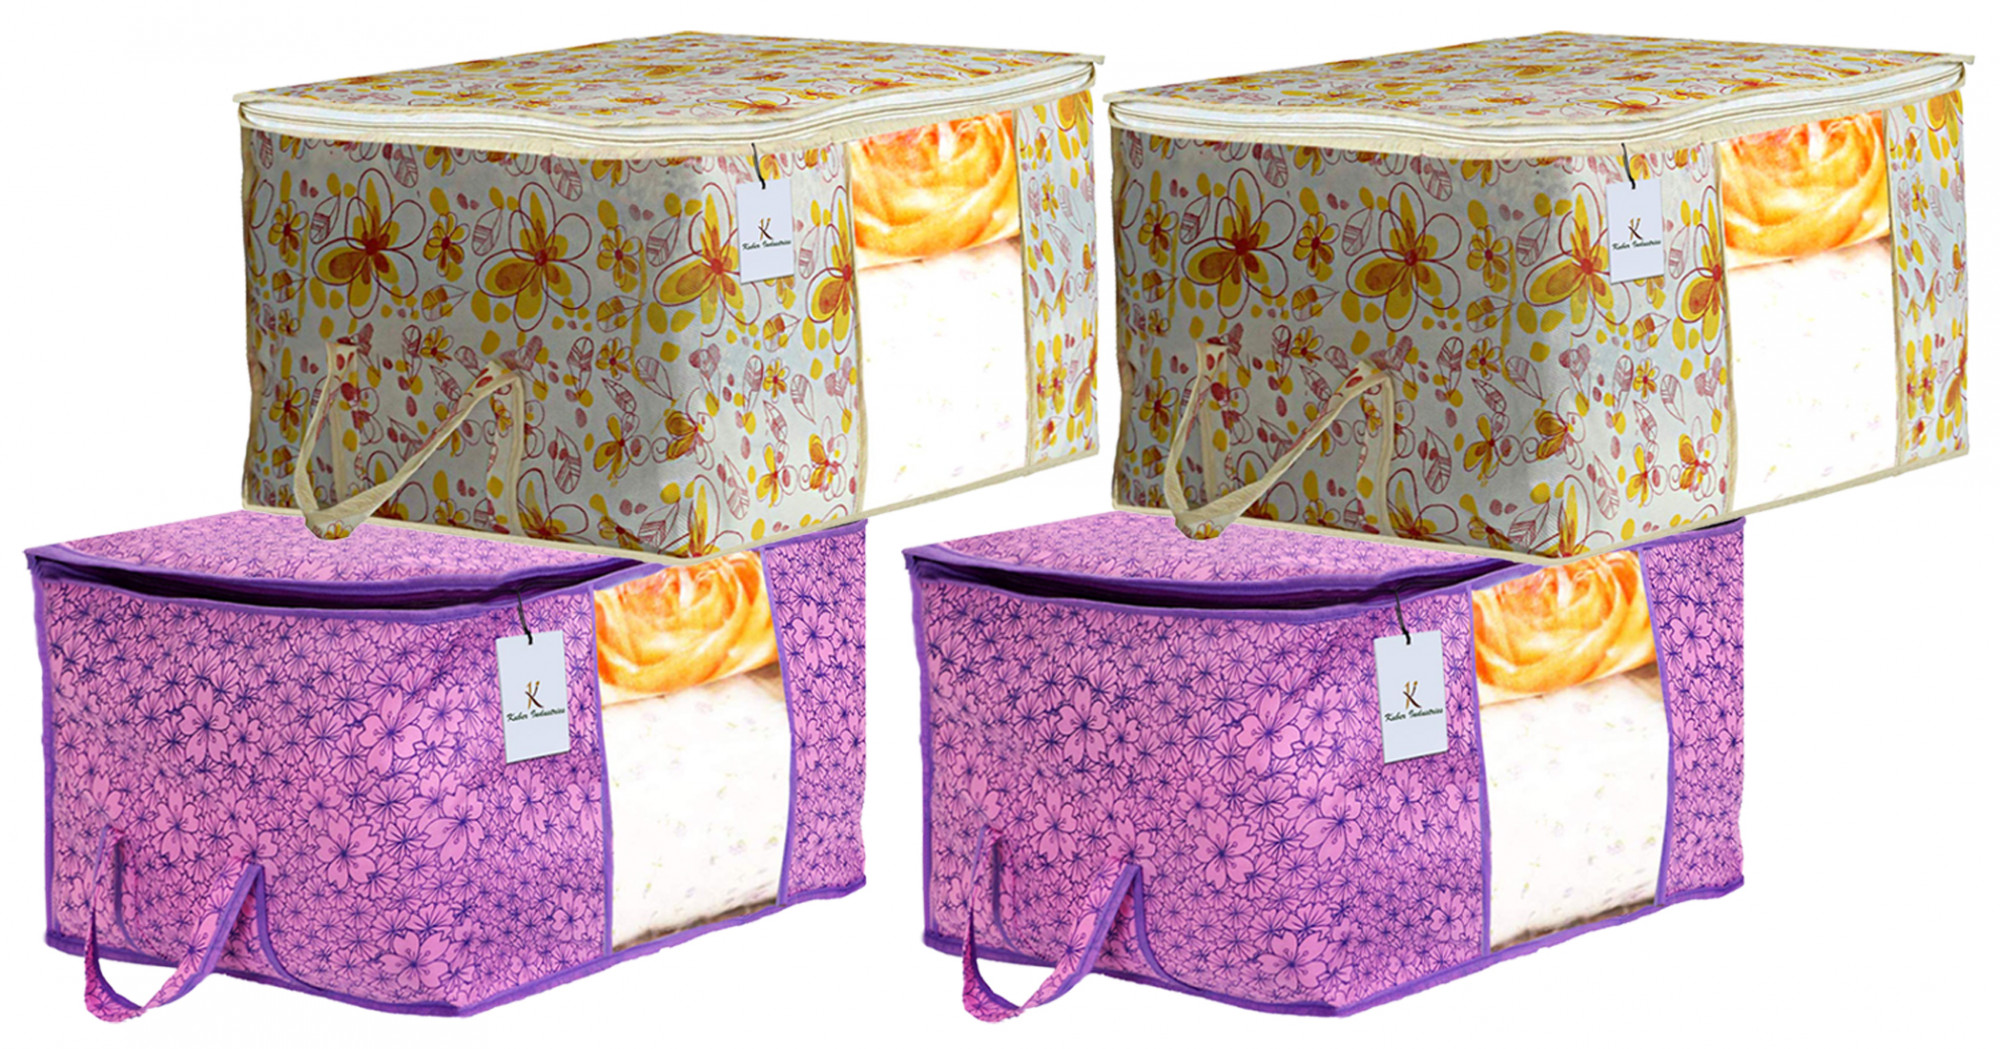 Kuber Industries Metalic Printed Non Woven Fabric Underbed Storage Bag,Cloth Organiser,Blanket Cover with Transparent Window, Pink Purple & Ivory Red -CTKTC41055